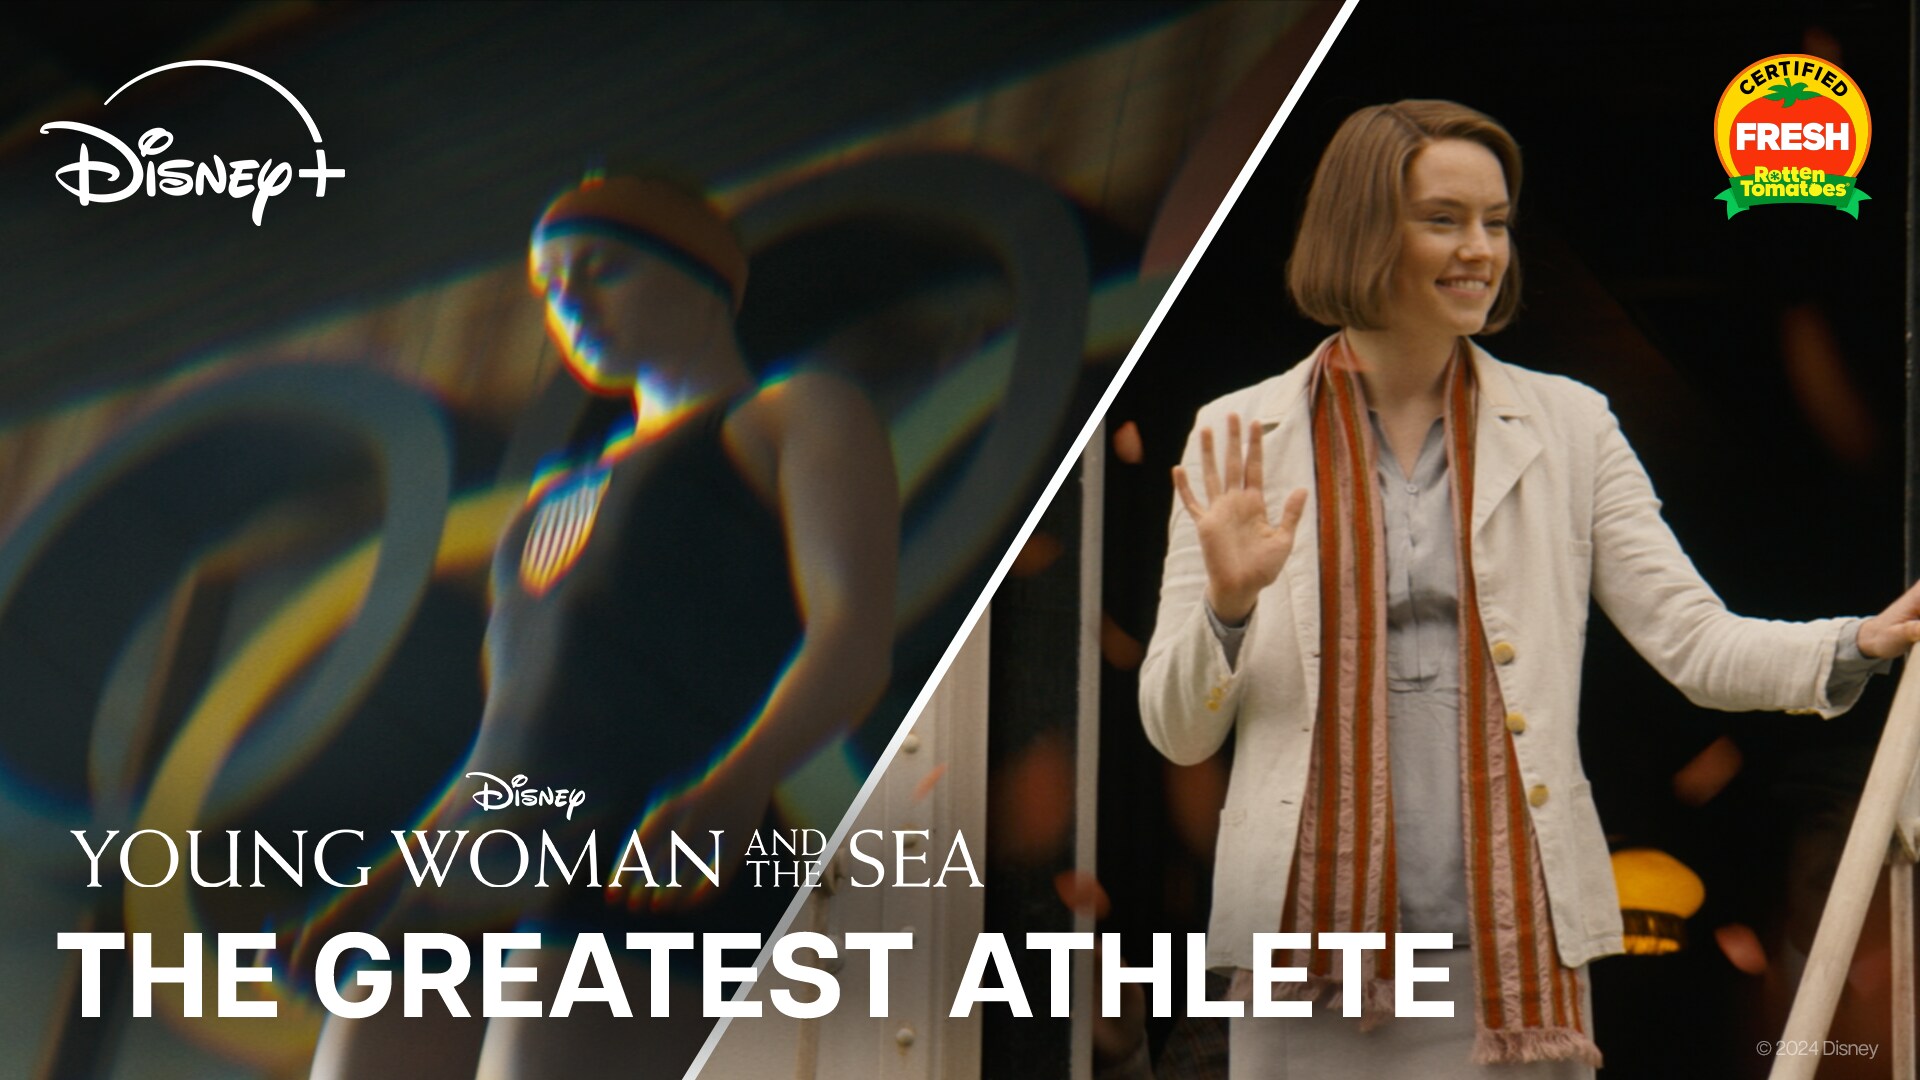 Young Woman and the Sea | "The Greatest Athlete" | Disney+